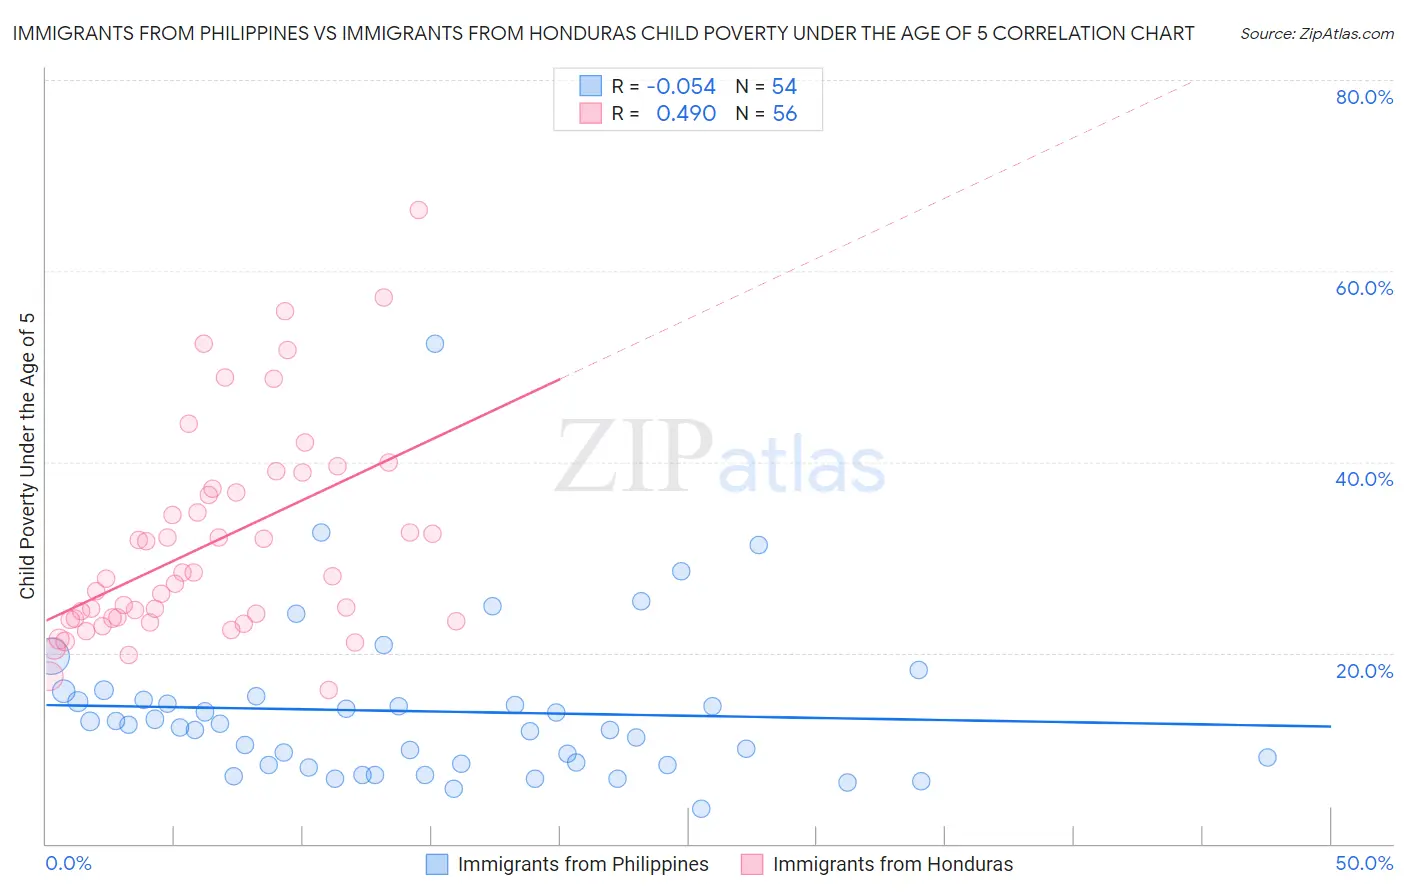 Immigrants from Philippines vs Immigrants from Honduras Child Poverty Under the Age of 5